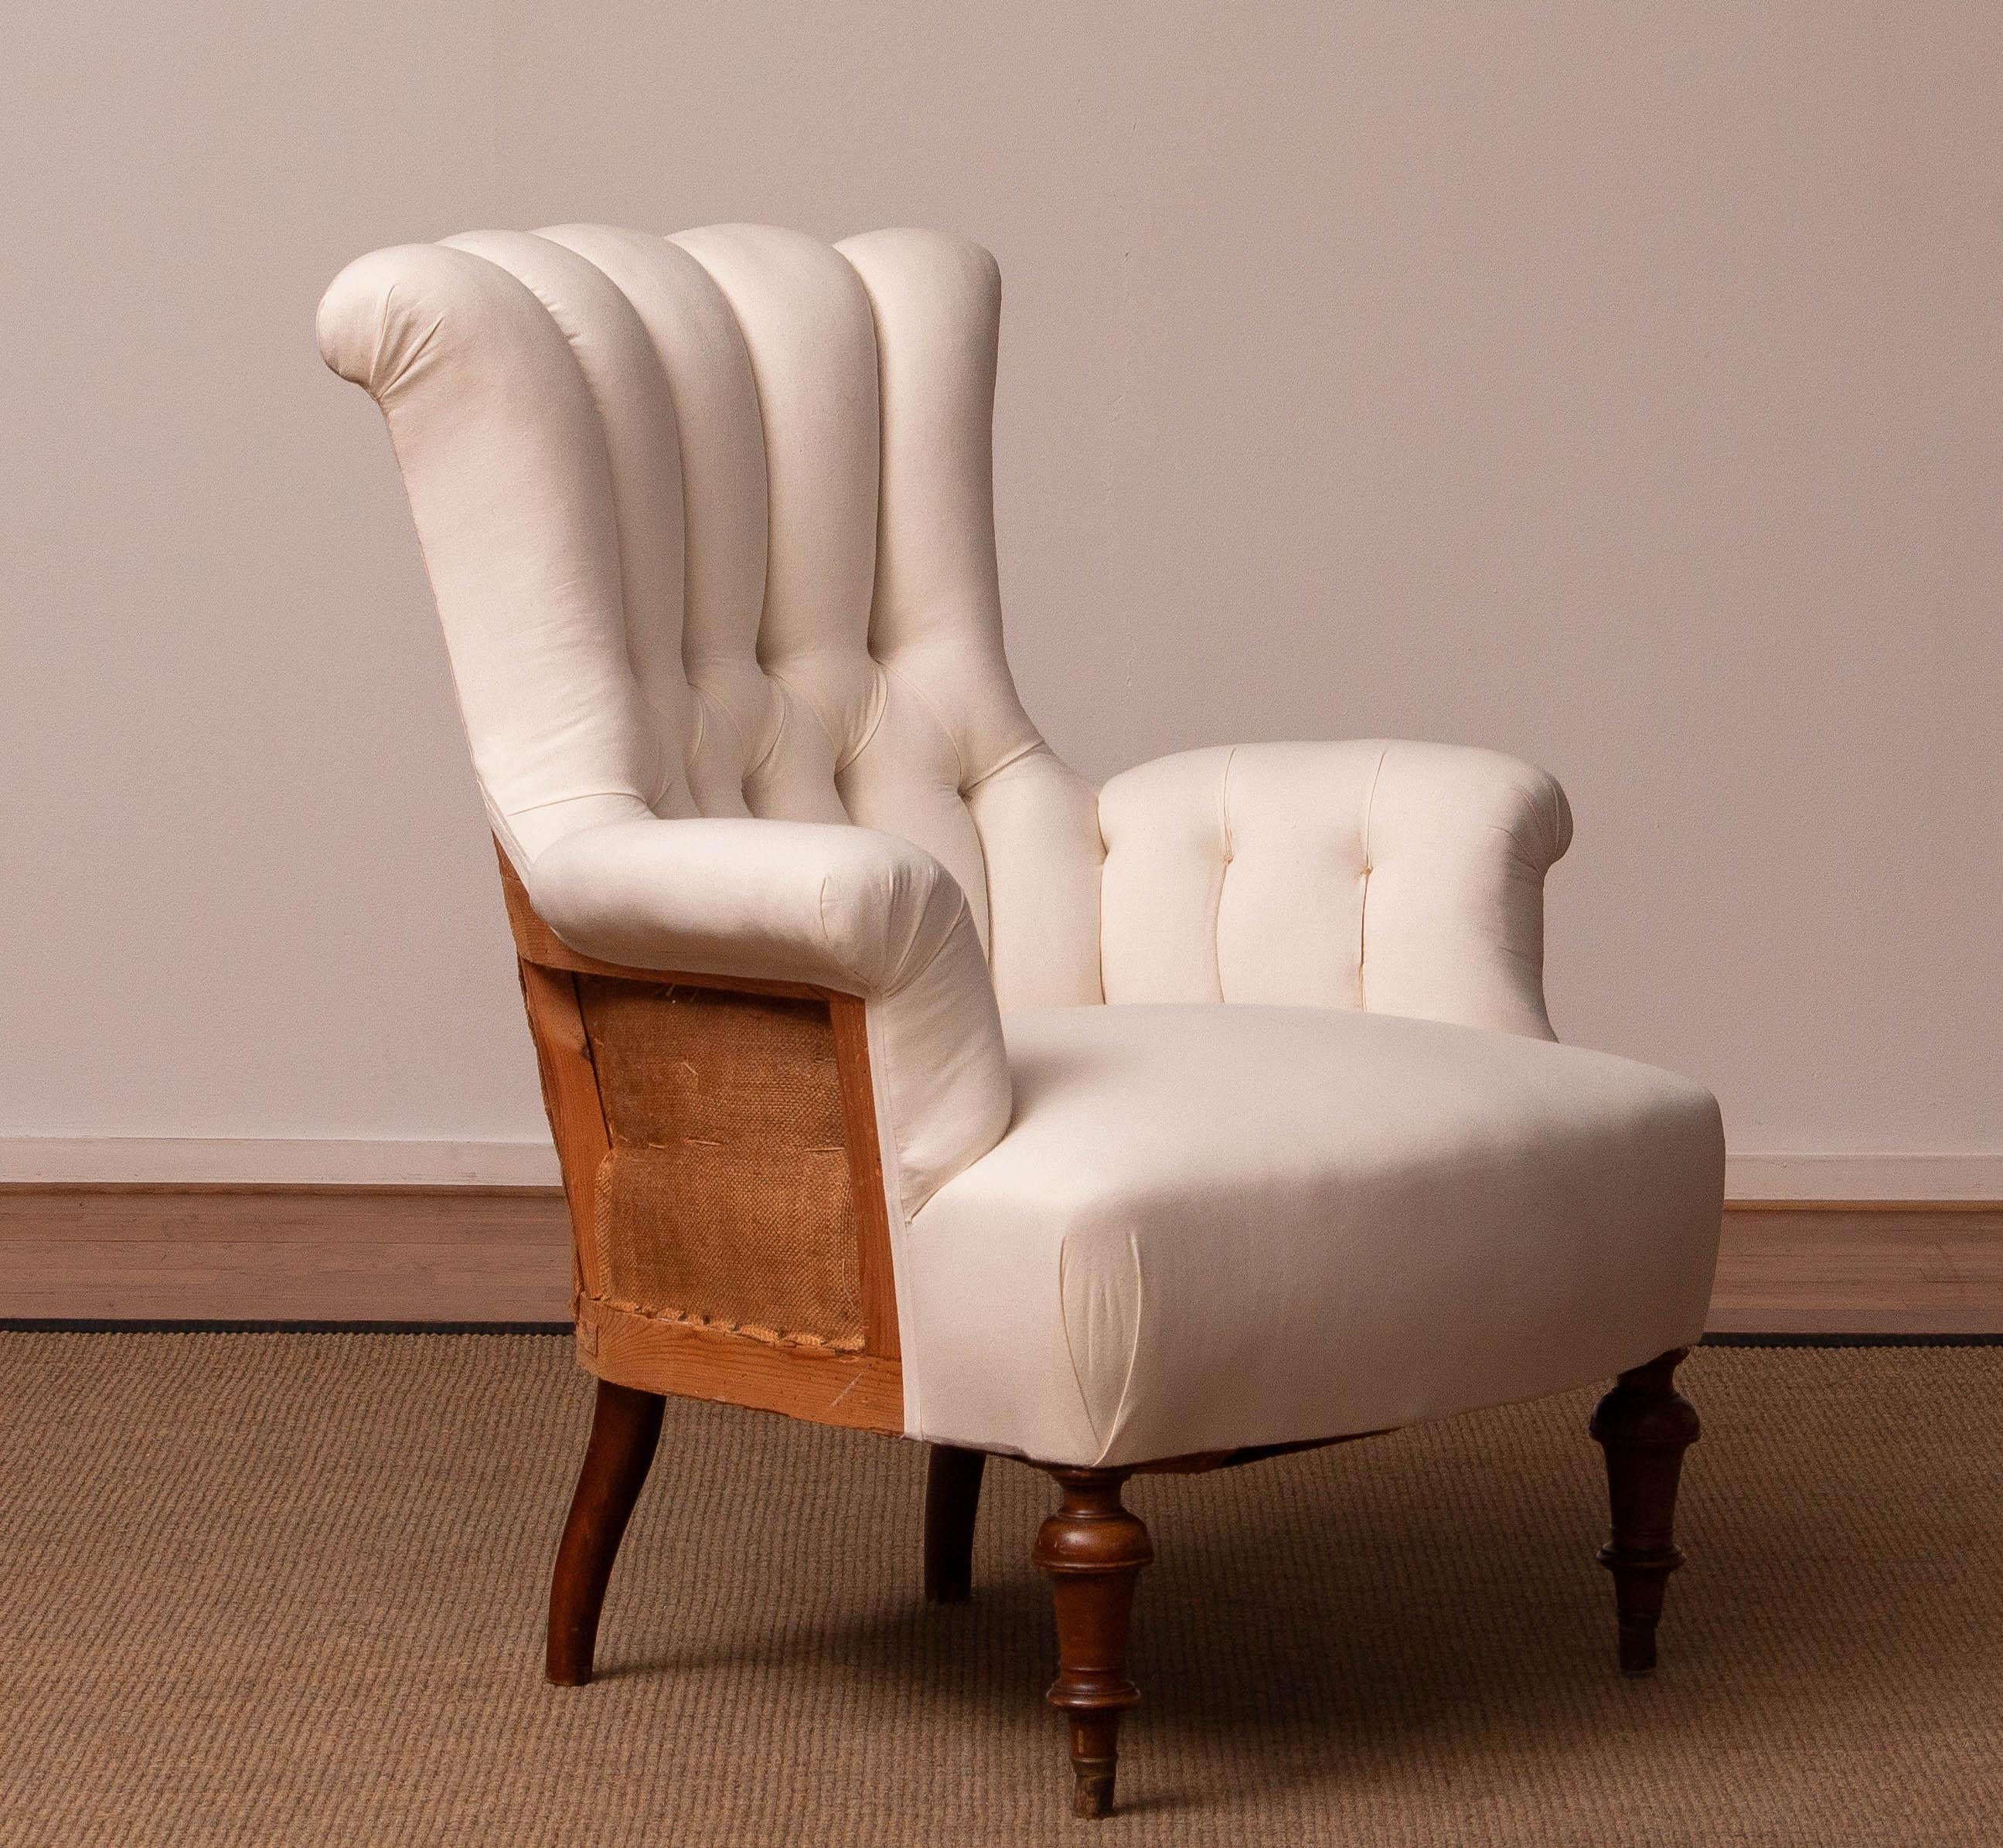 19th Century White Cotton Victorian 'Deconstructed' Tufted Scroll-Back Chair For Sale 1